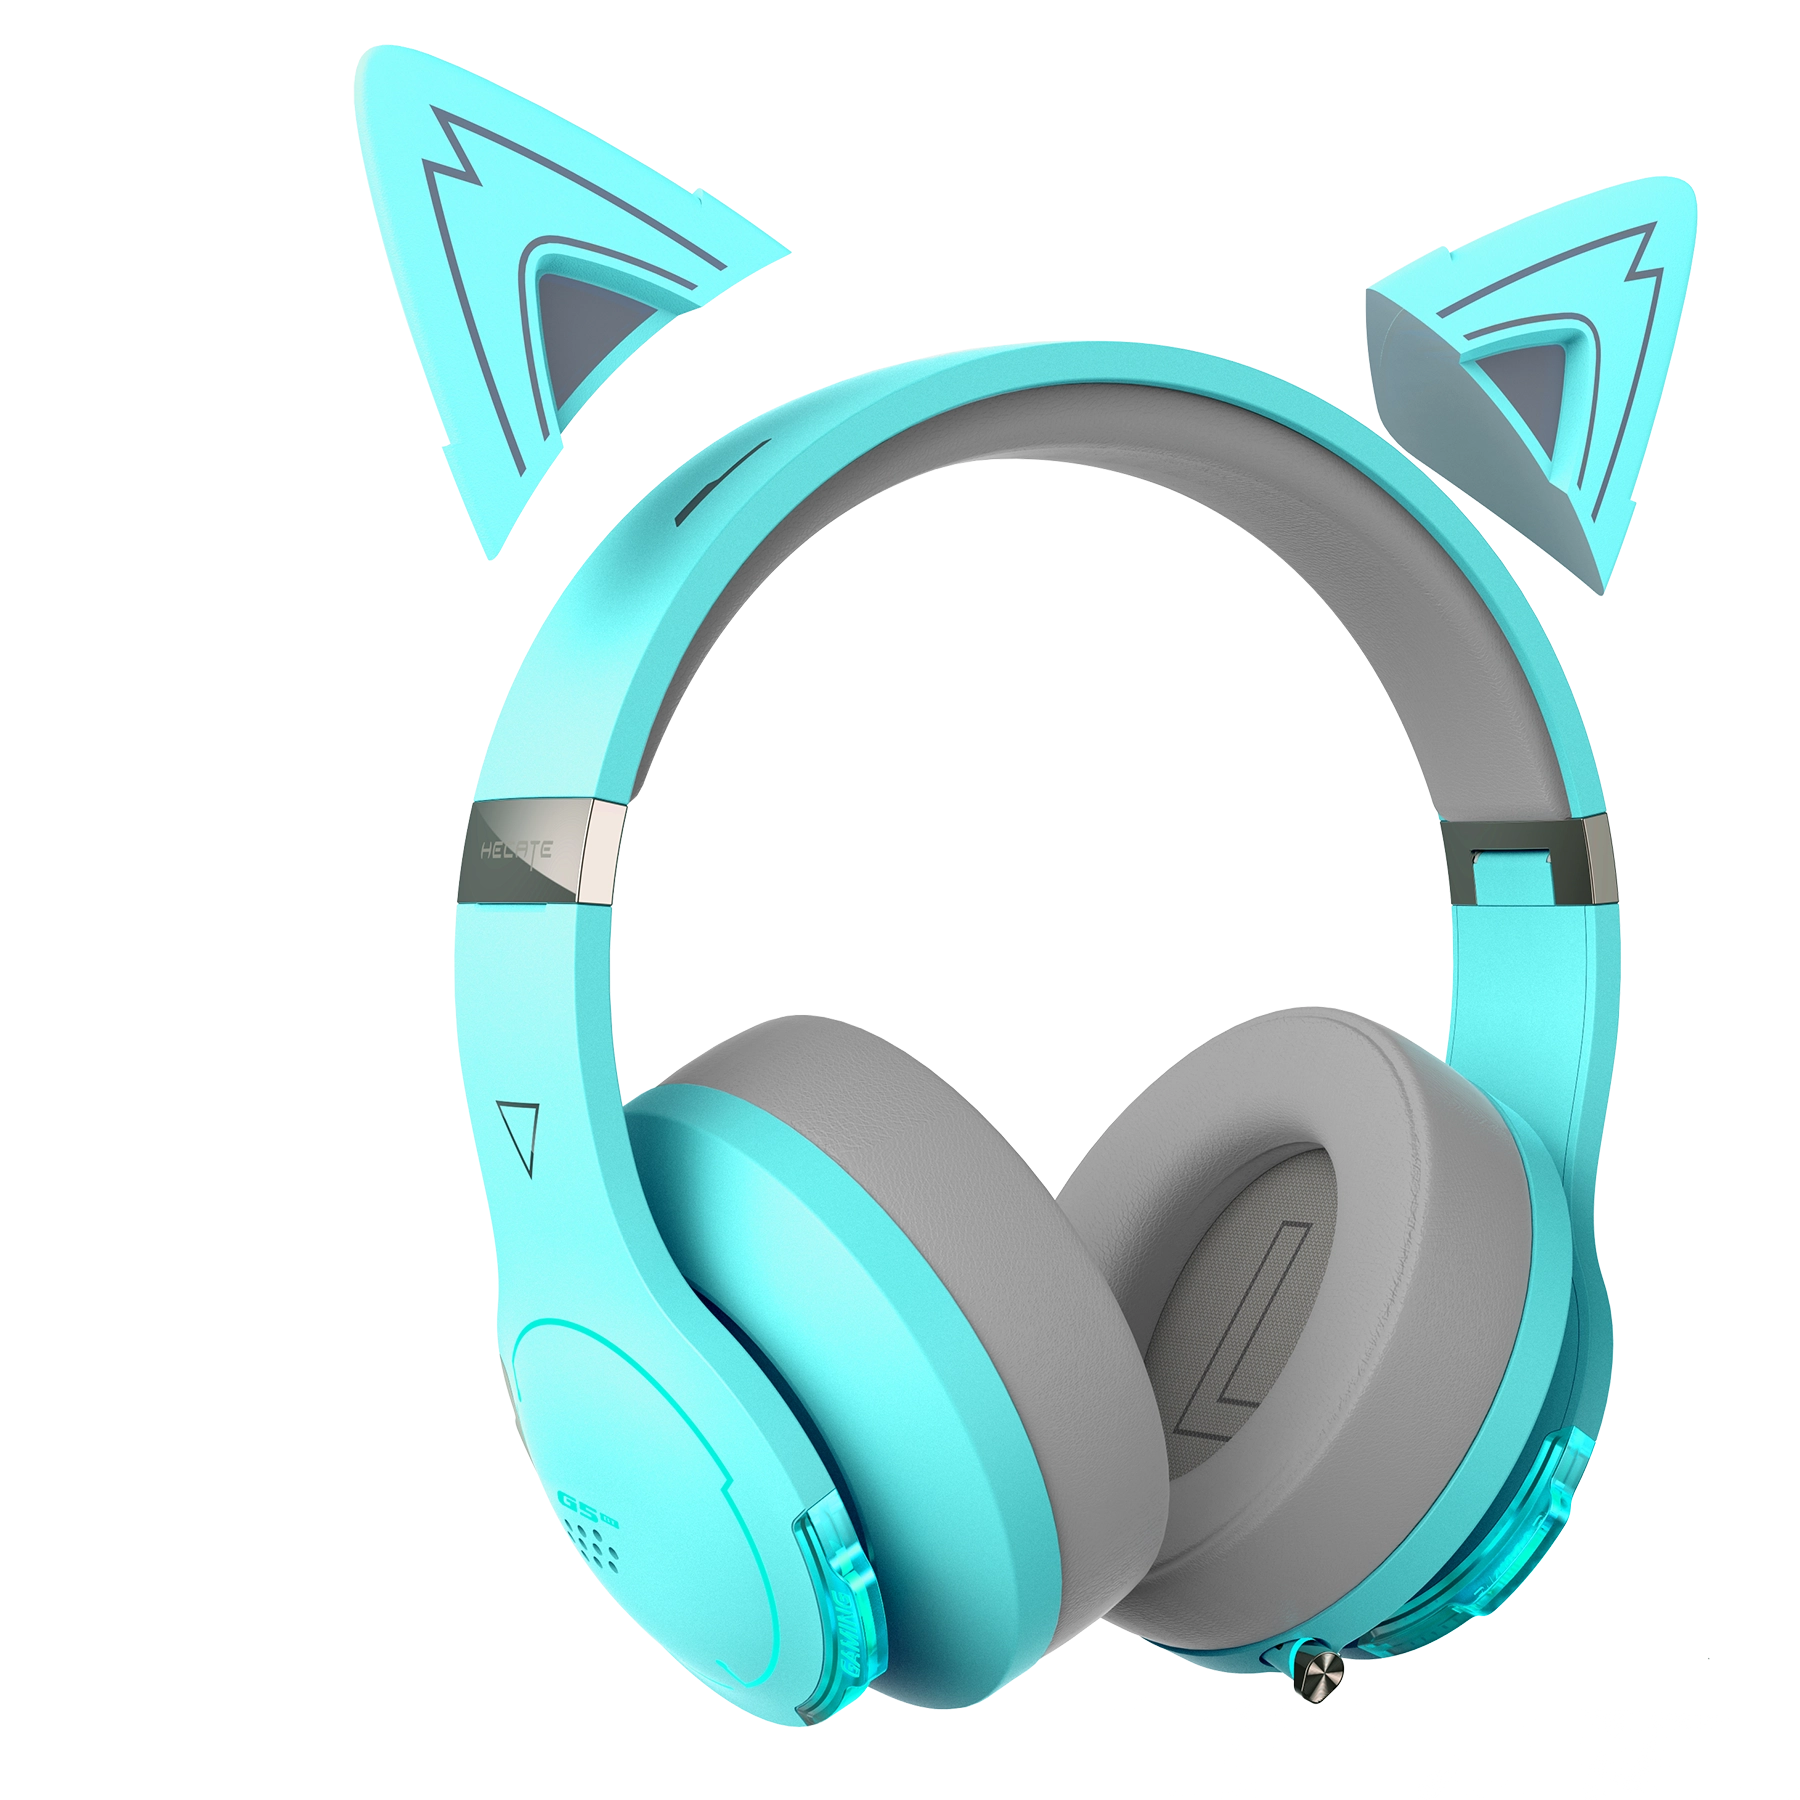 G5BT CAT Headphone product pictures turquoise_